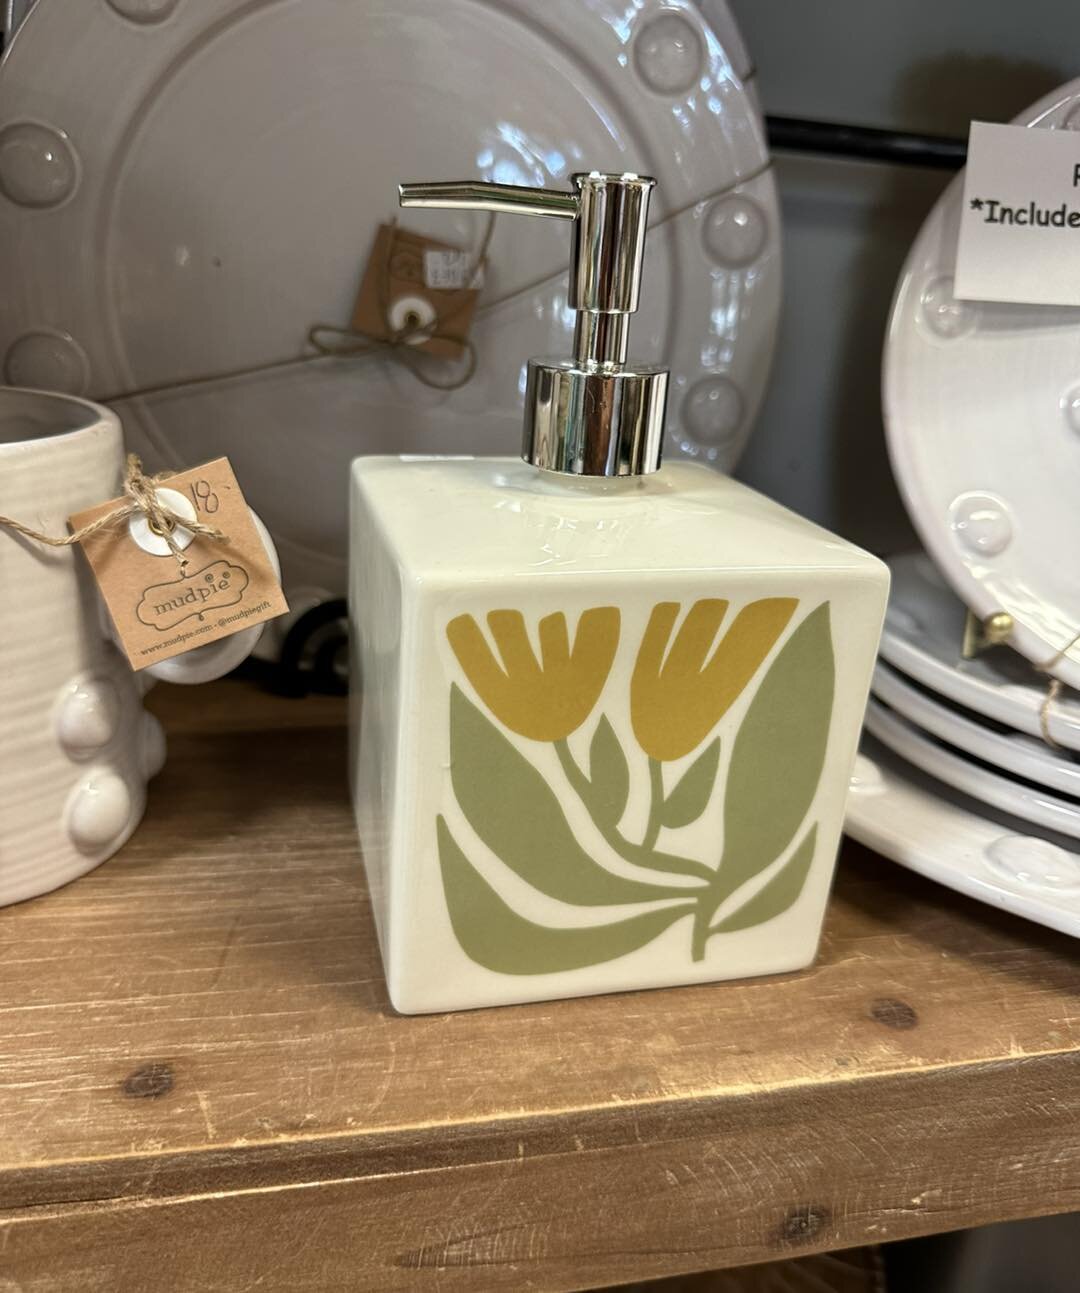 This soap pump is our new fav.. 💛💚
The perfect touch to you bathroom or kitchen sink!